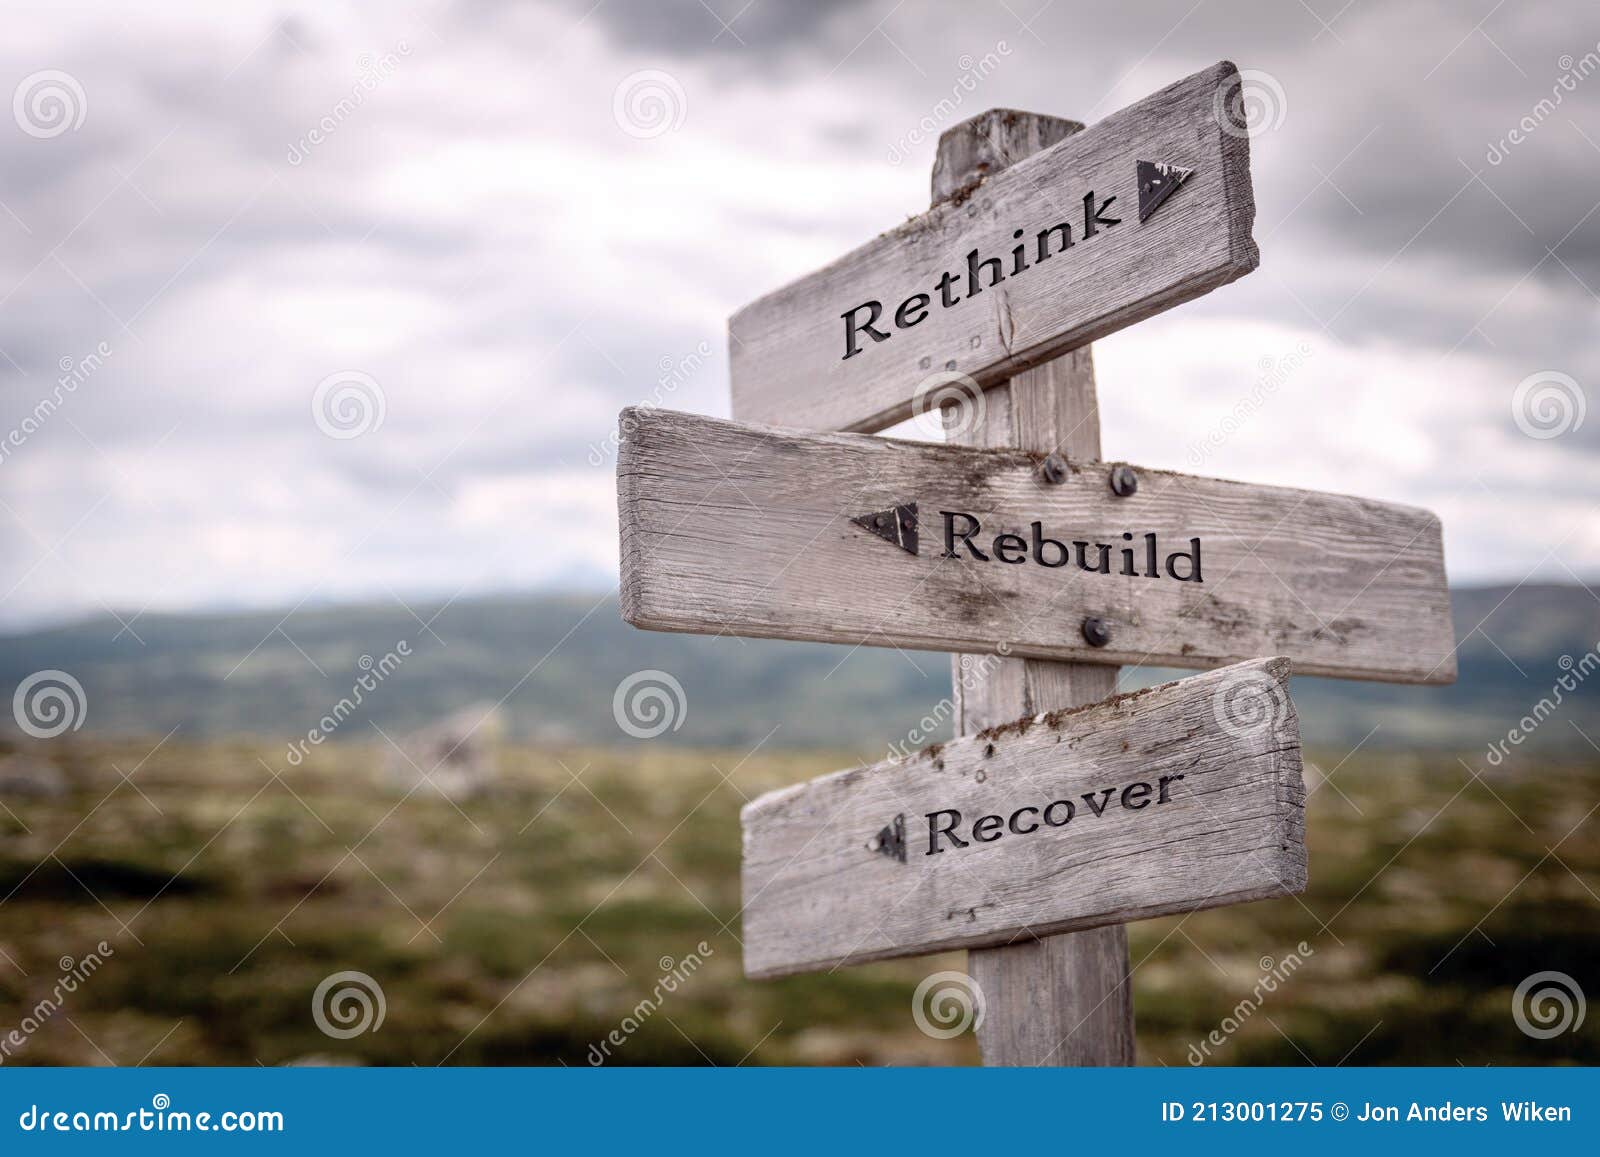 rethink rebuild recover signpost outdoors